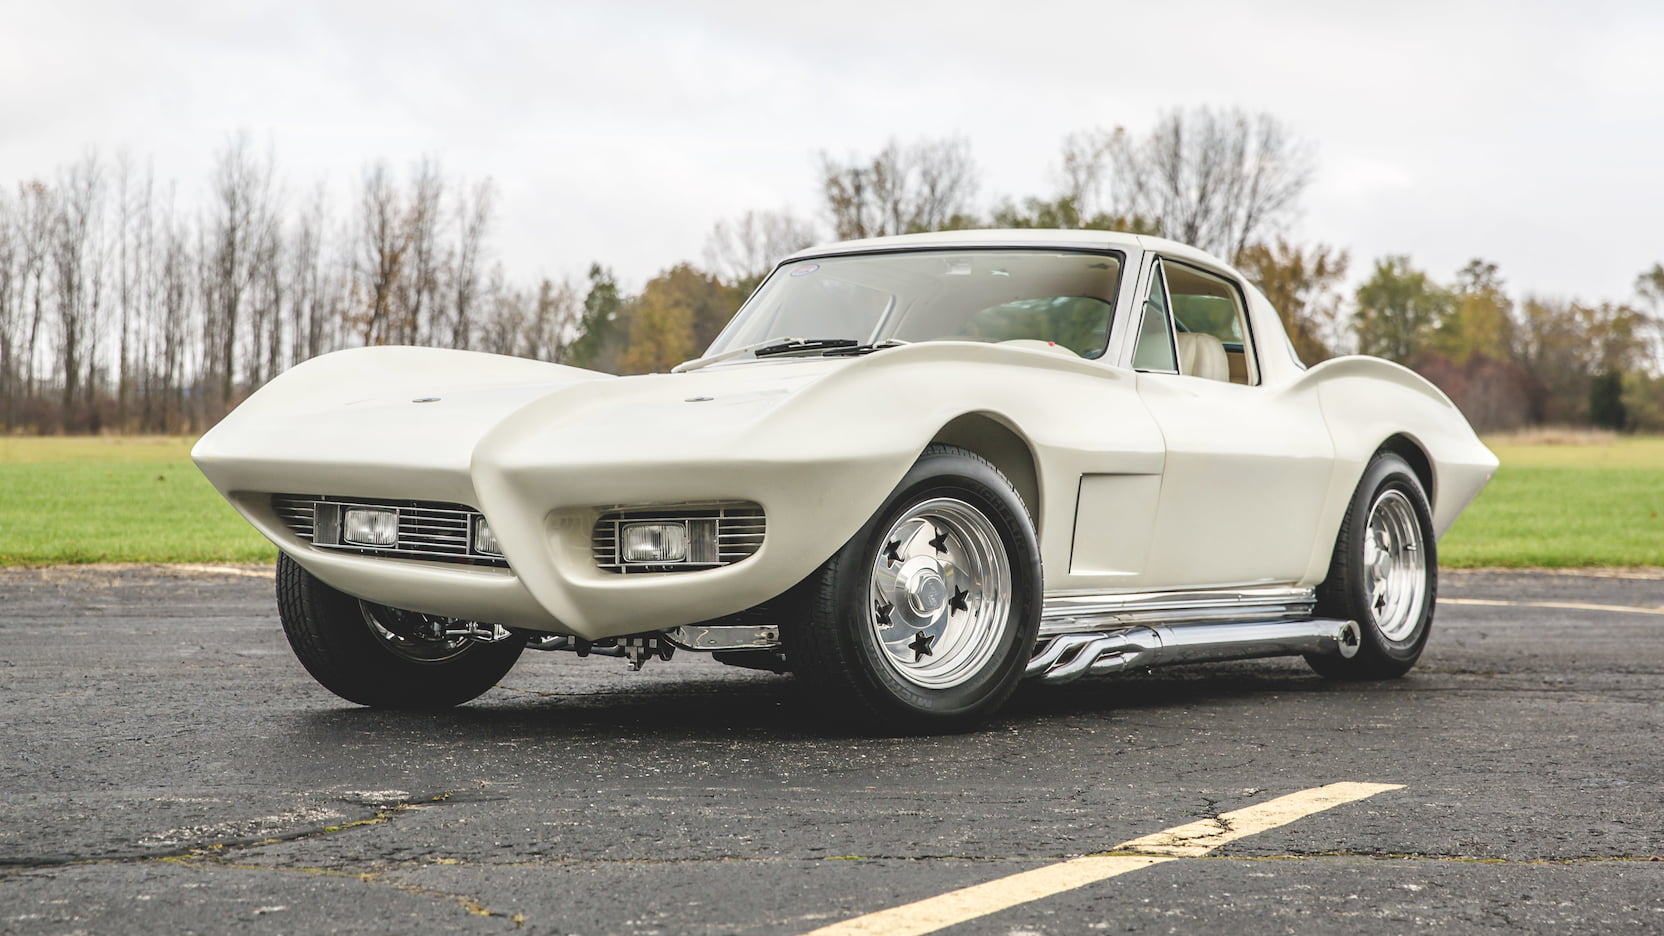 Corvette Of The Day: Outer Limits